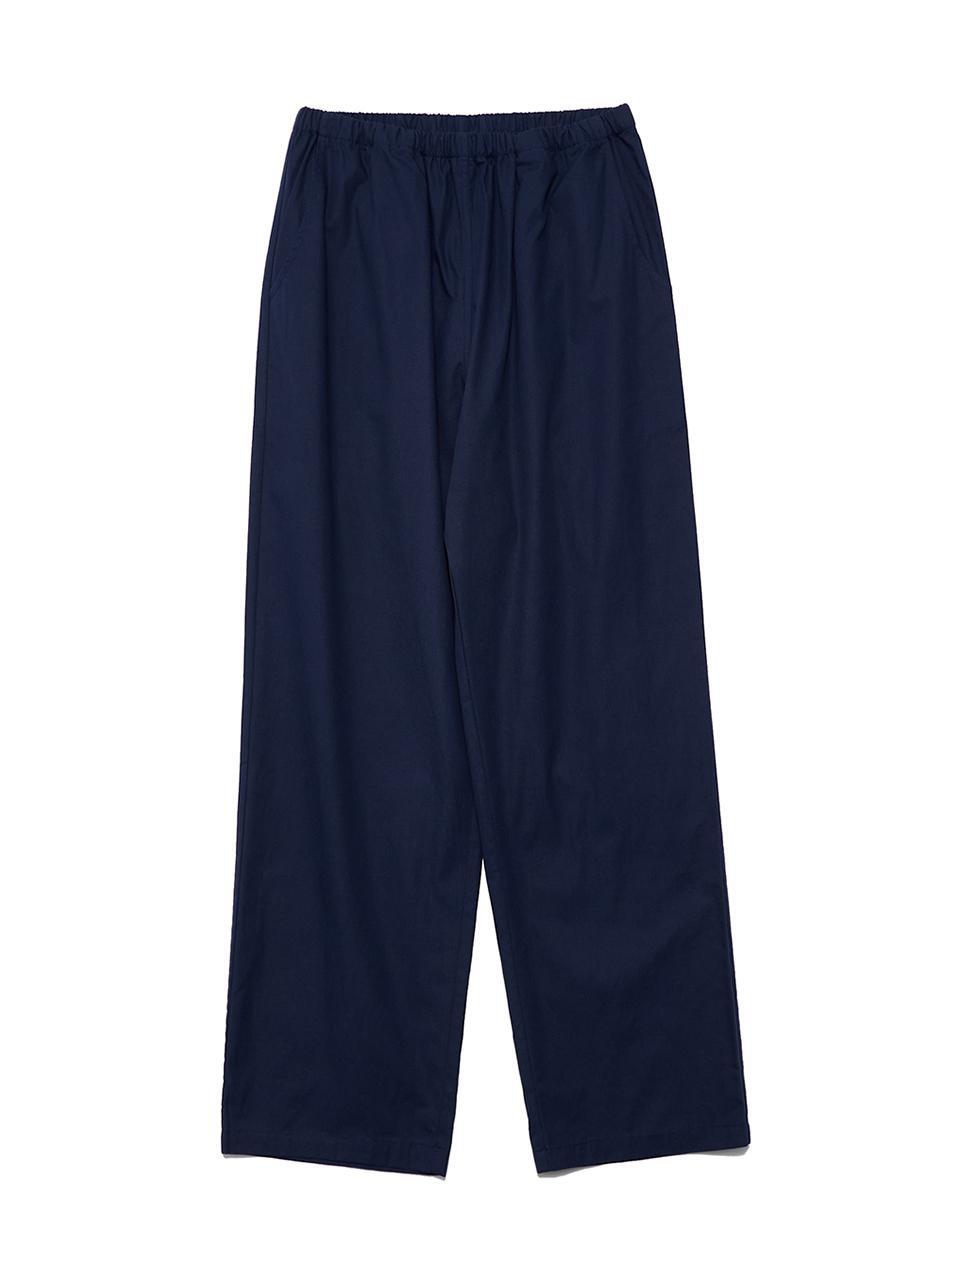 [RAG]QUOFFEE SOLID LONG PANTS [NAVY]